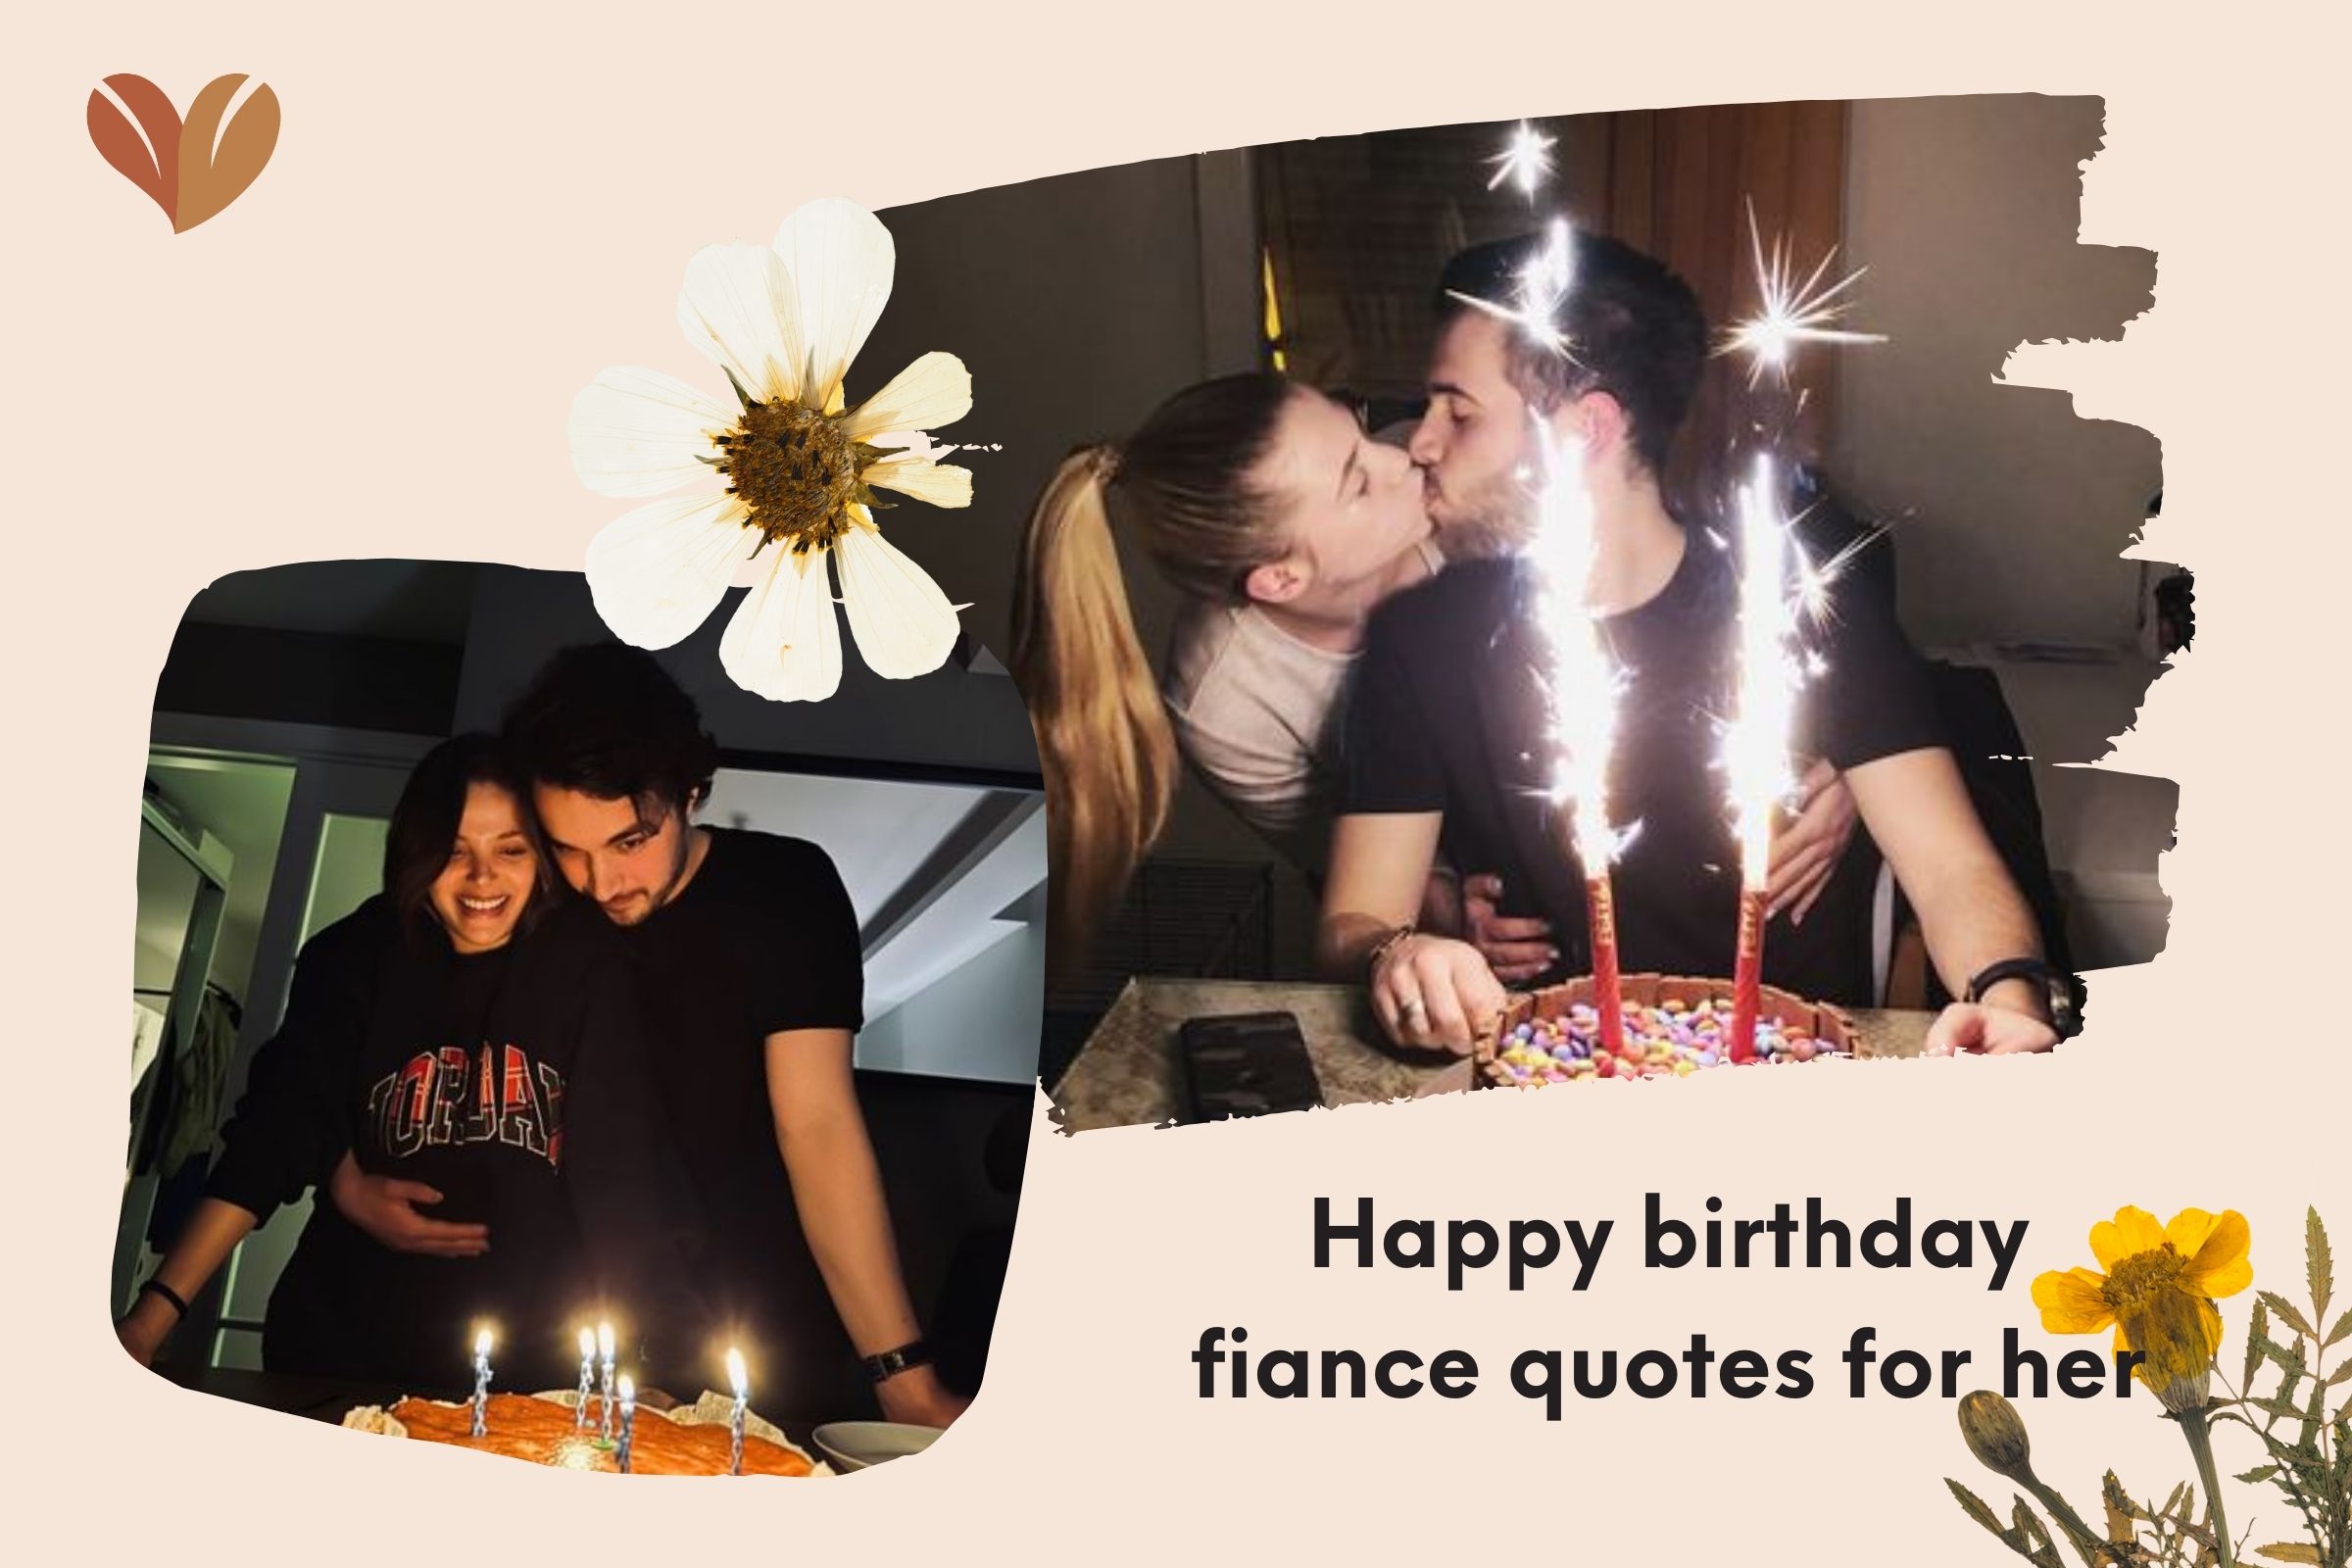 Happy birthday fiance quotes for her